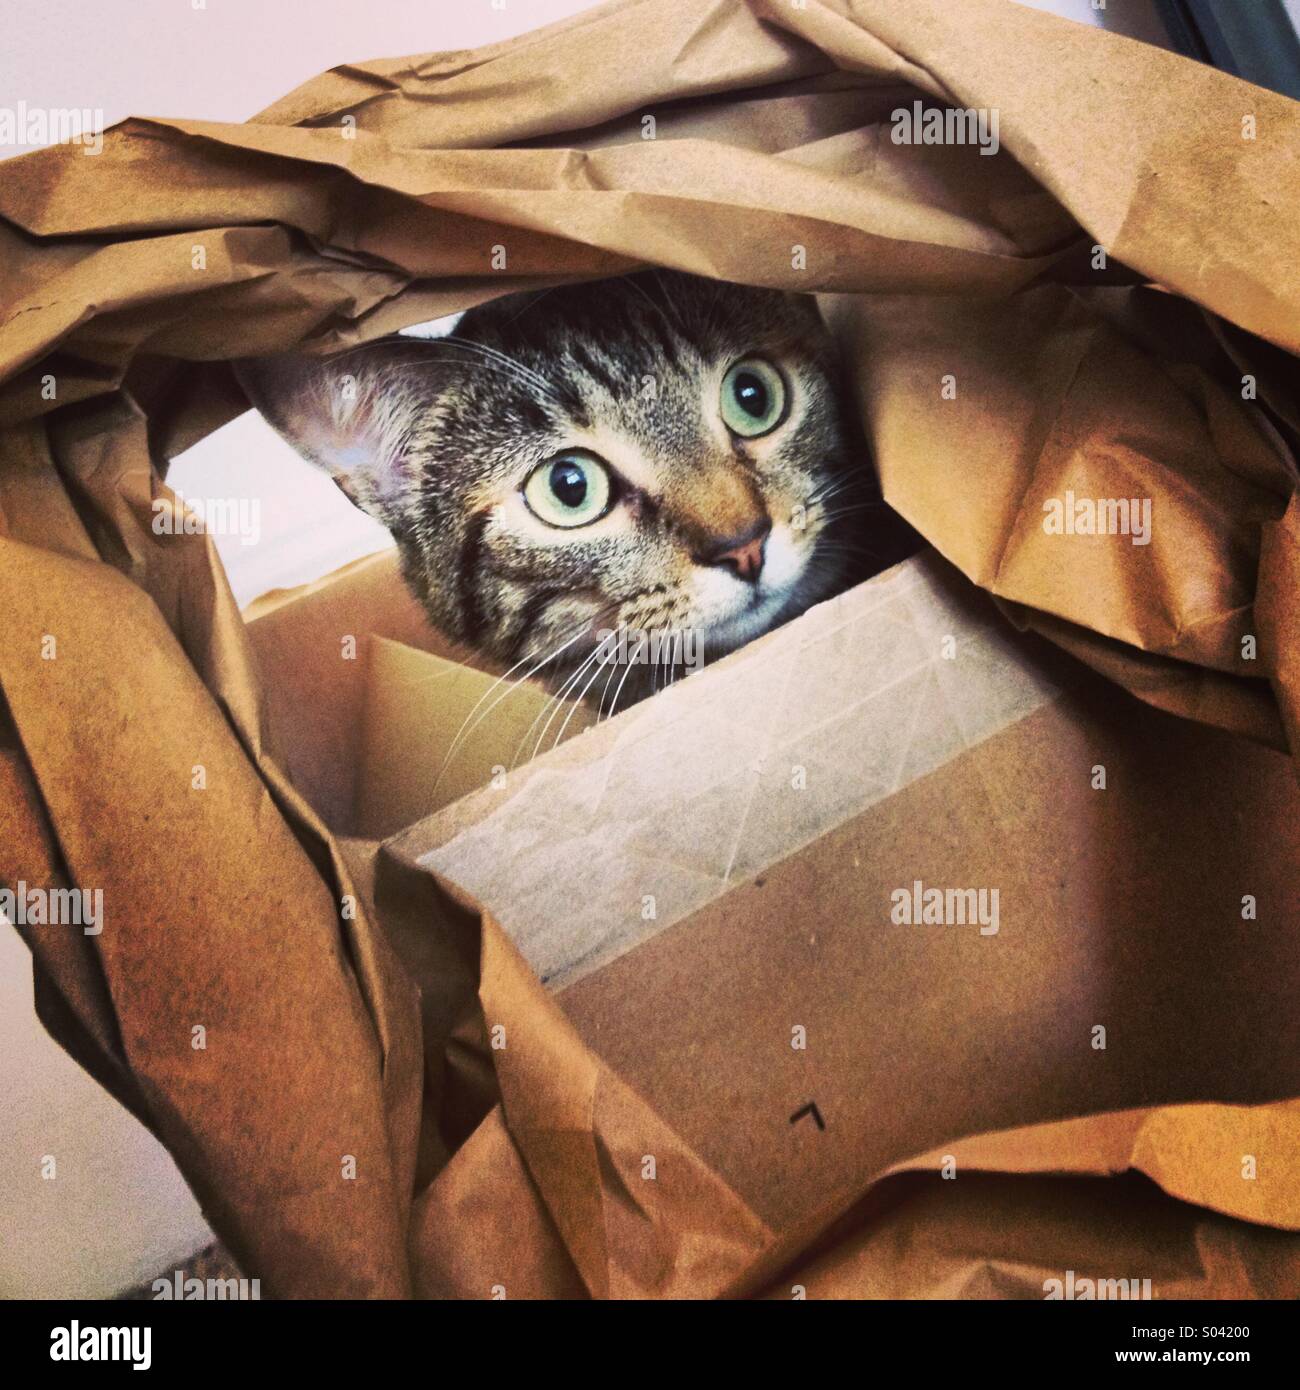 Tabby cat kitten plaing with paper in cardboard box. Stock Photo